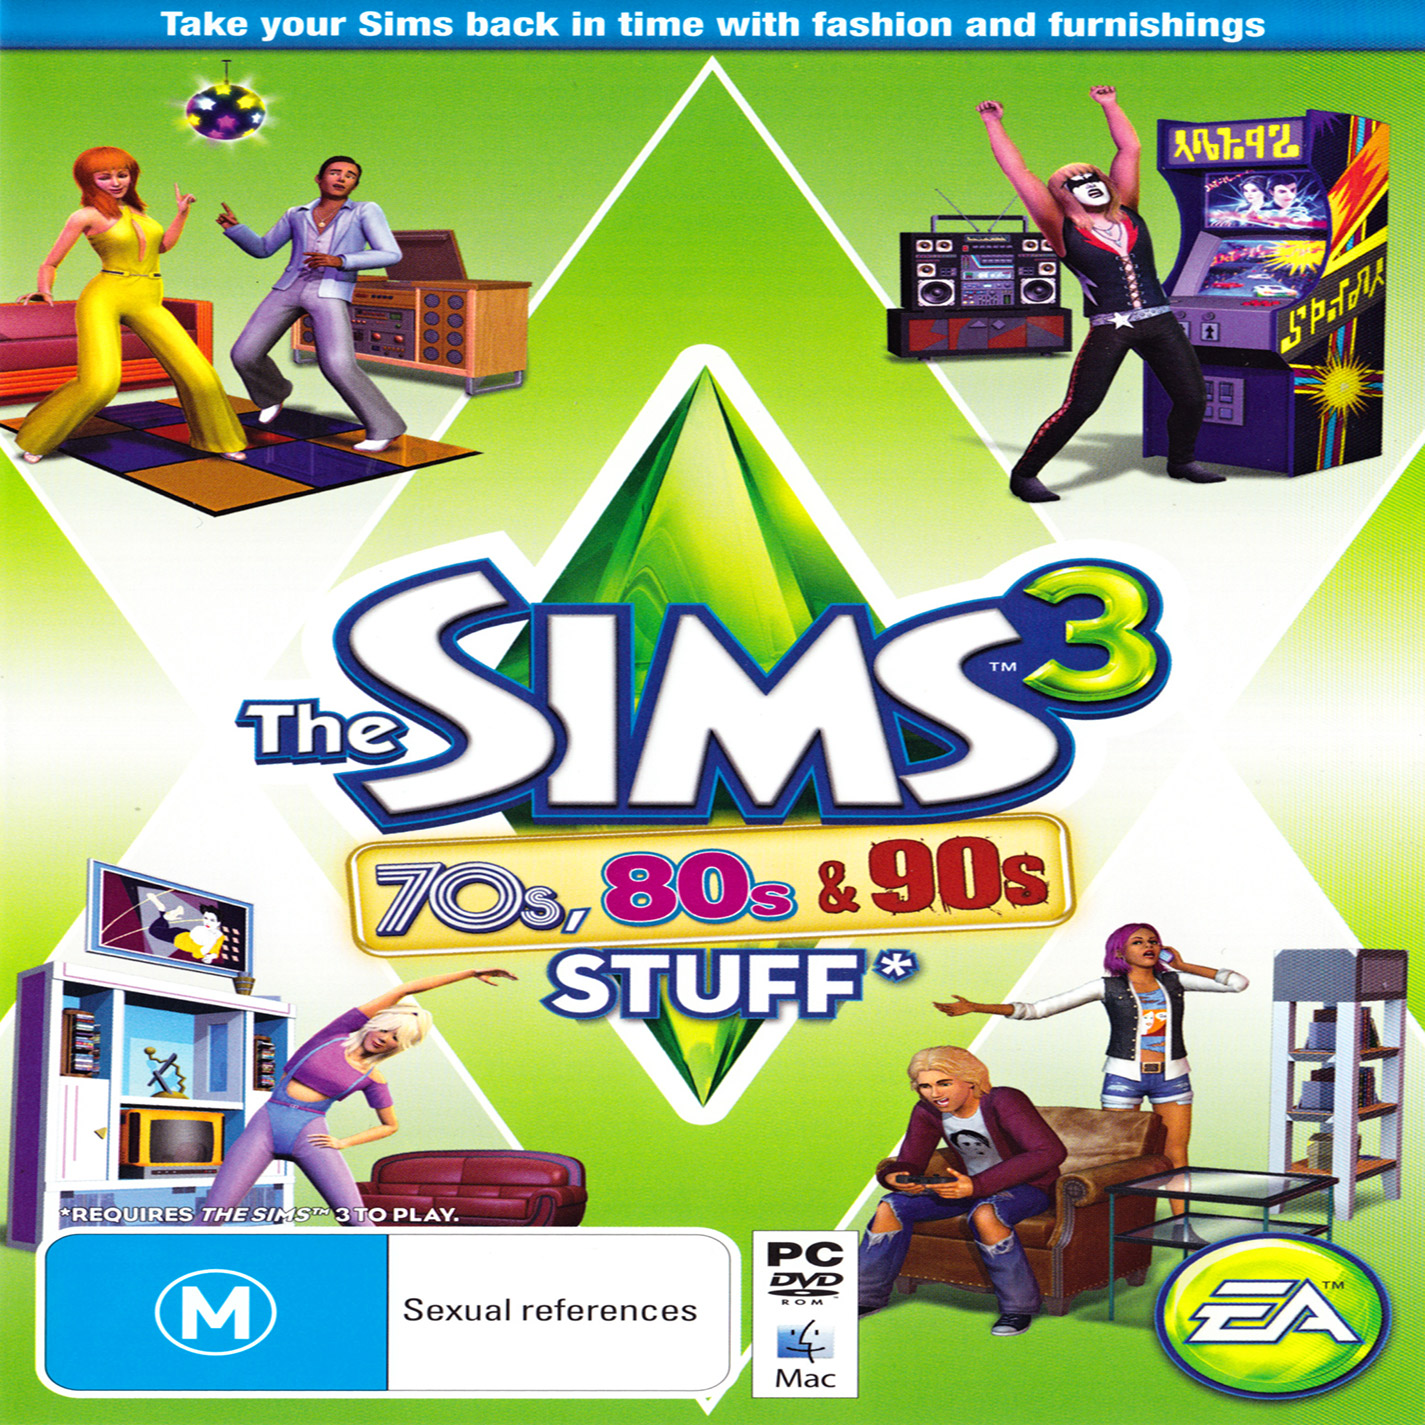 The Sims 3: 70s, 80s, & 90s Stuff - pedn CD obal